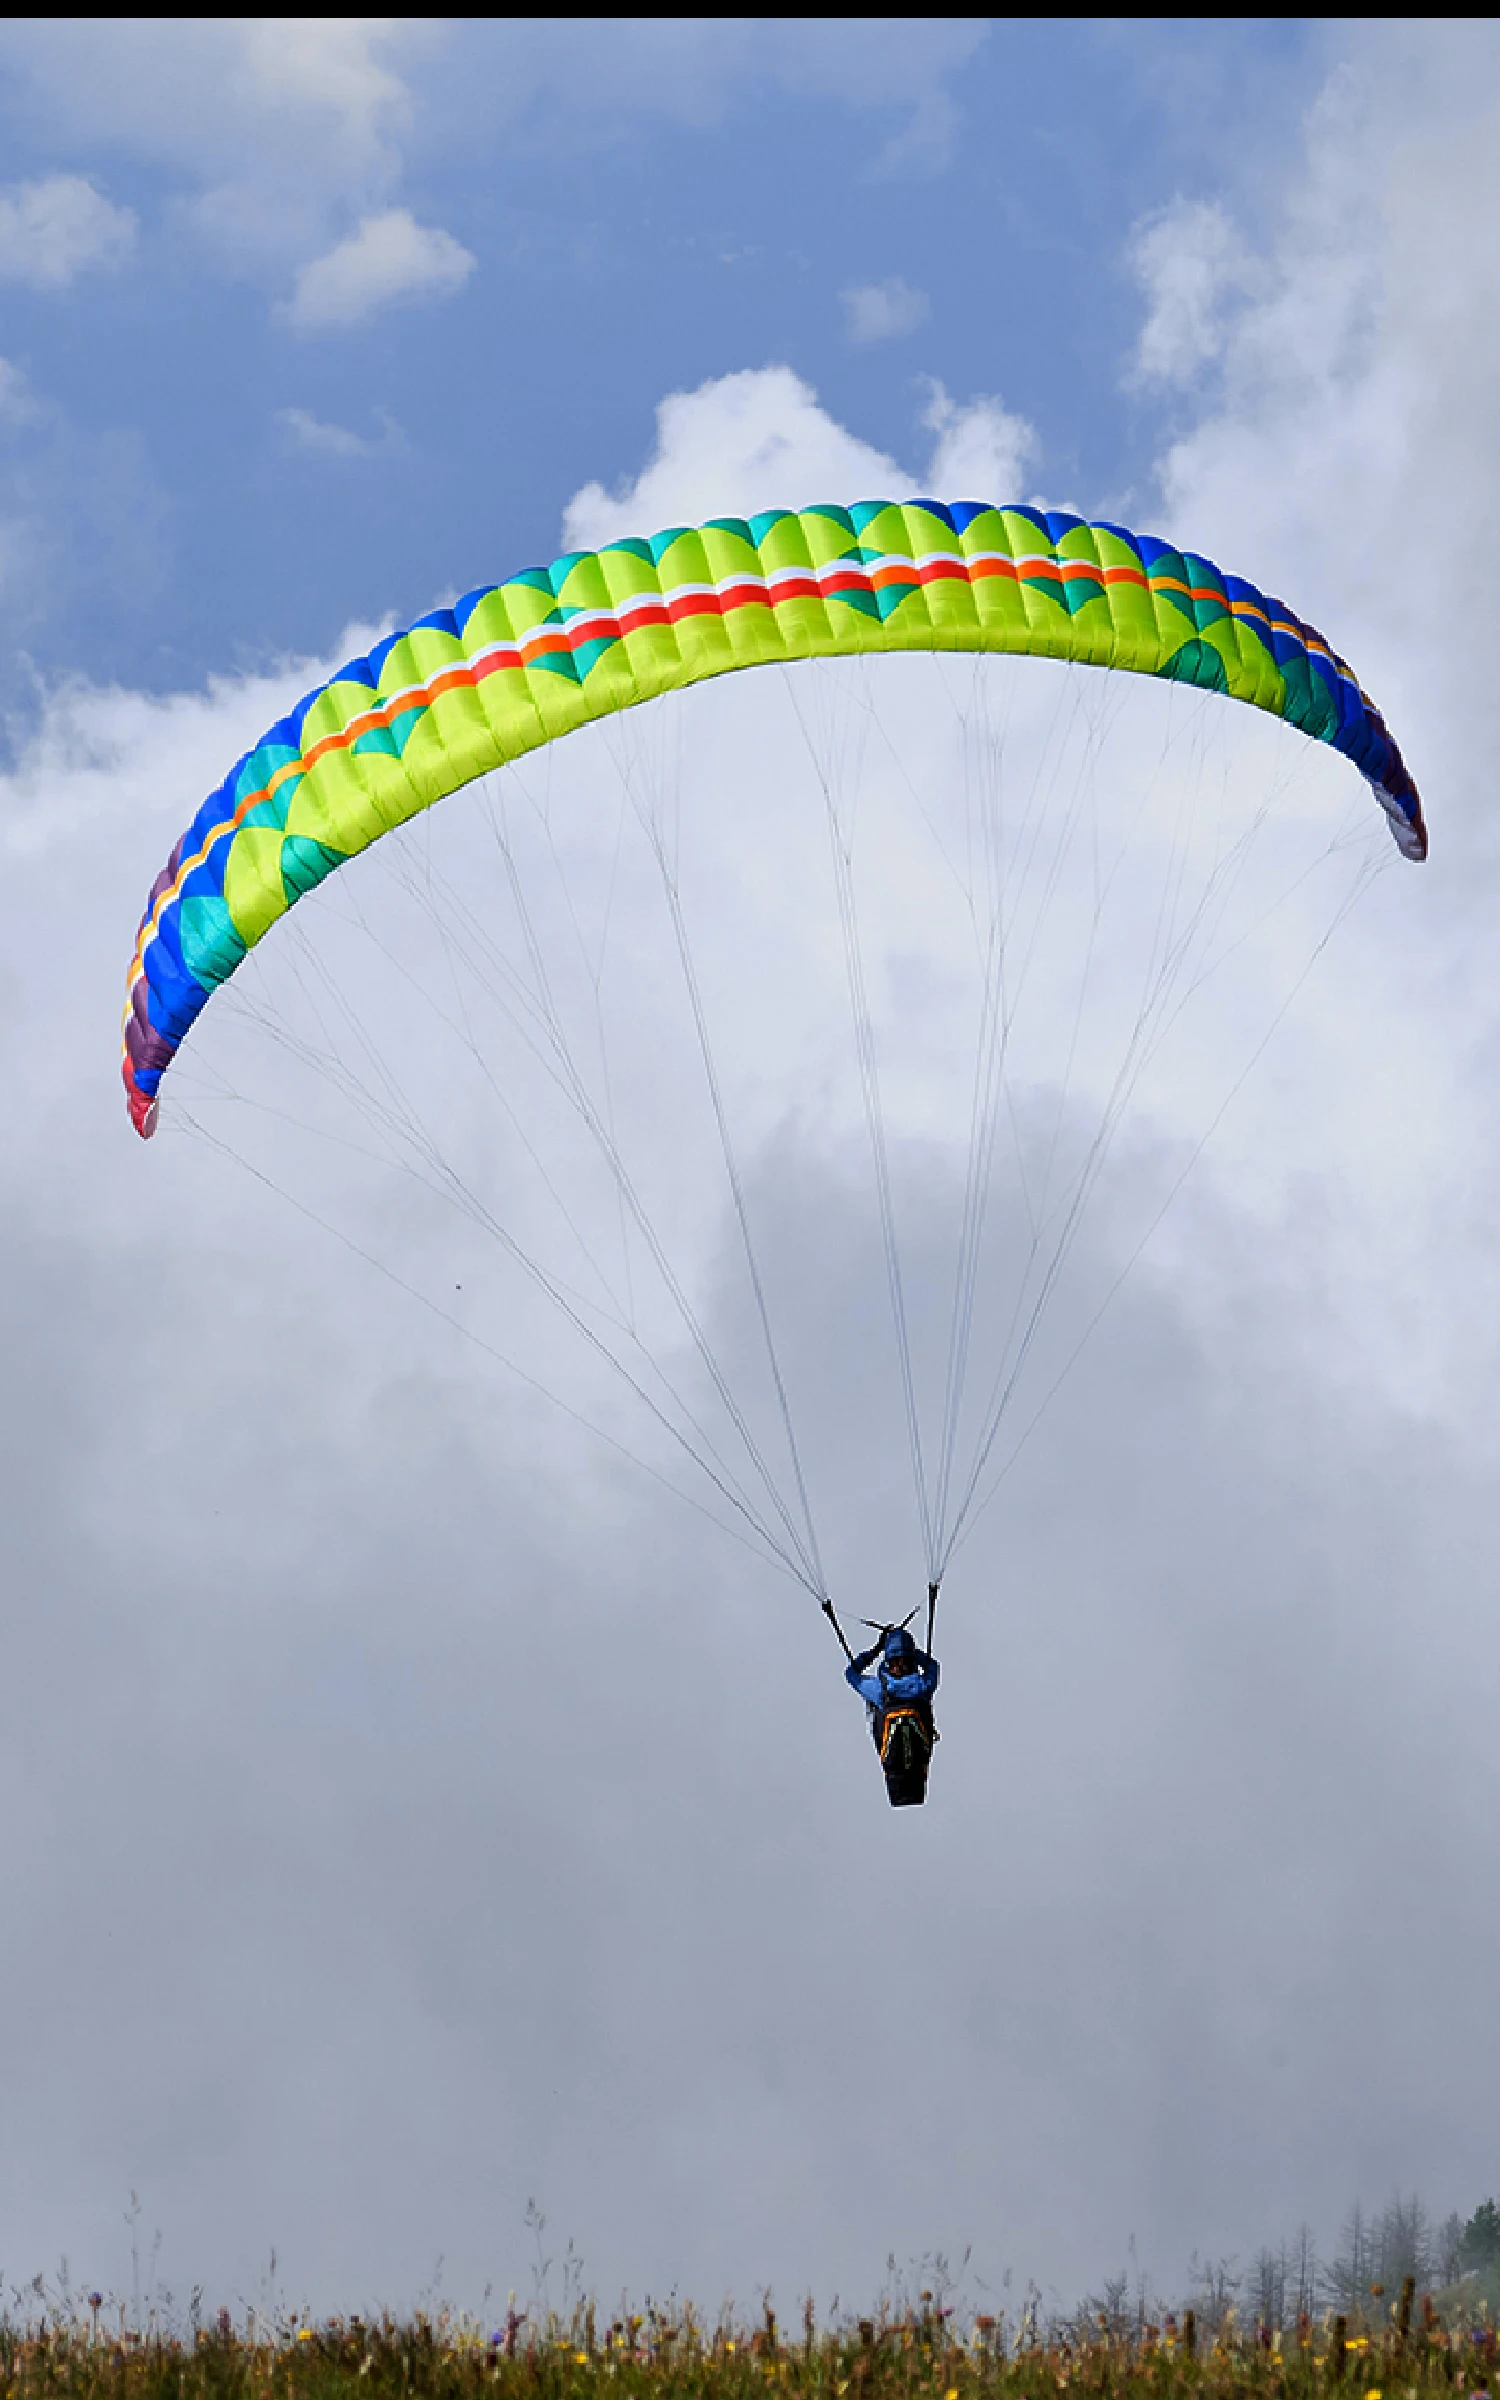 What are the dangers of paragliding? - Quora